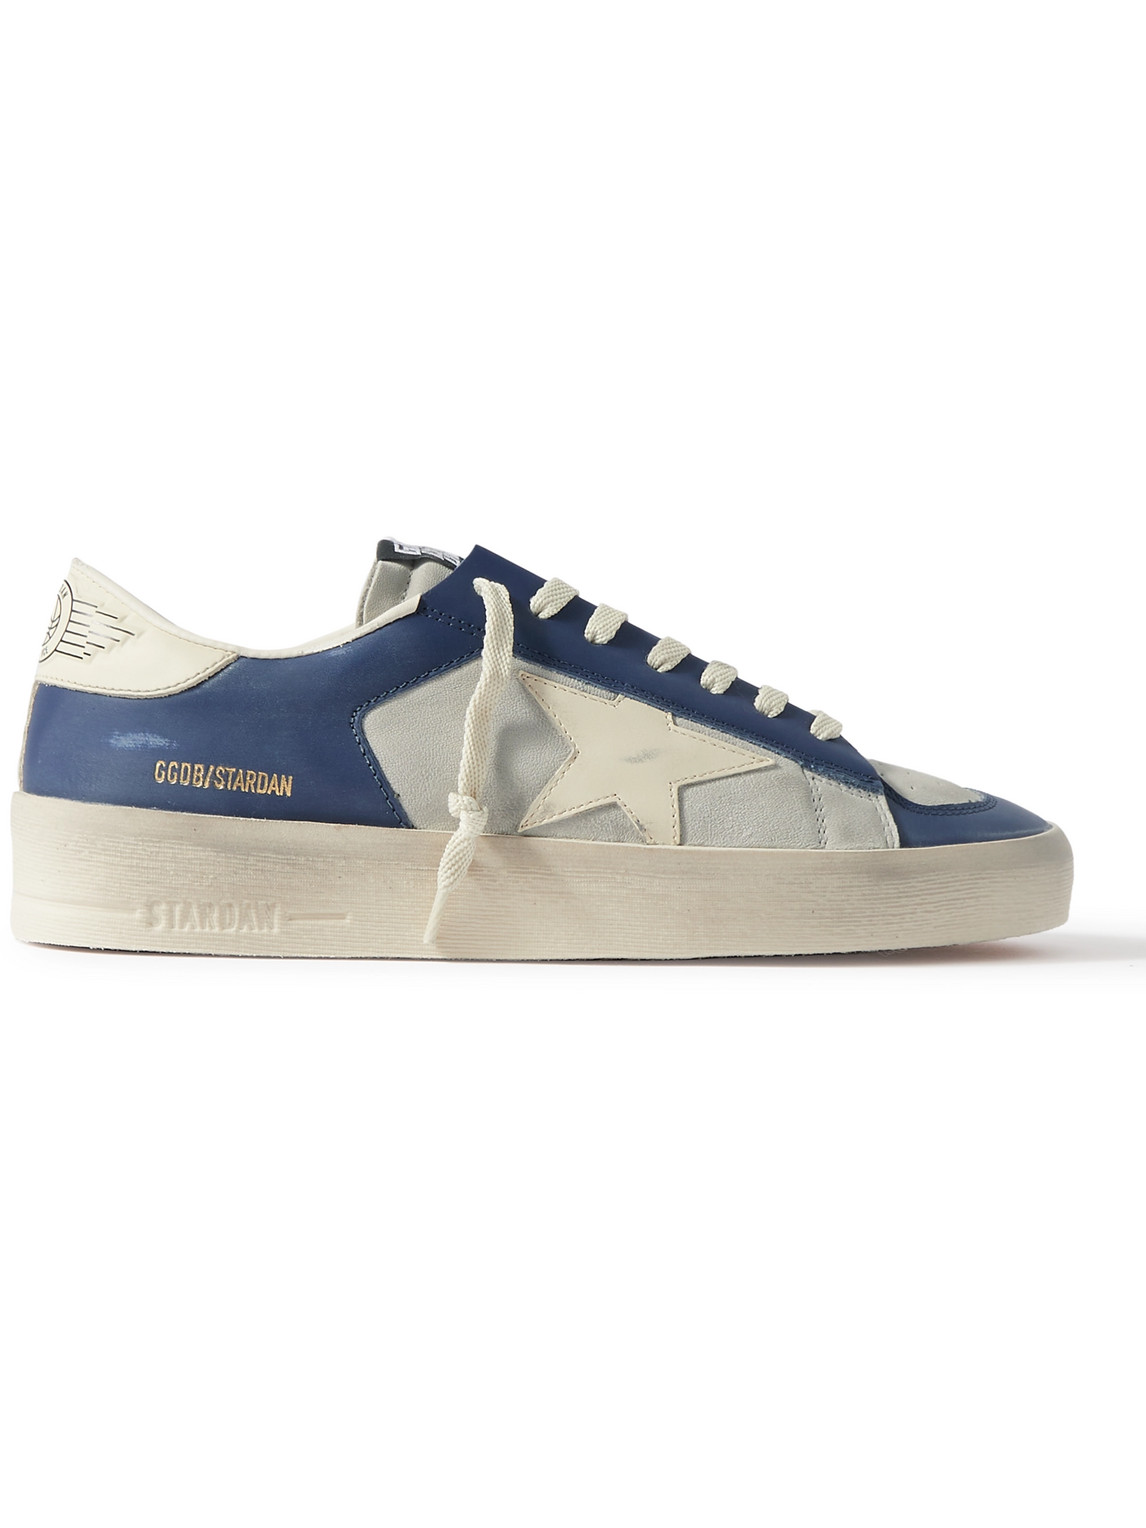 Golden Goose Stardan Distressed Colour-block Leather Sneakers In Blue